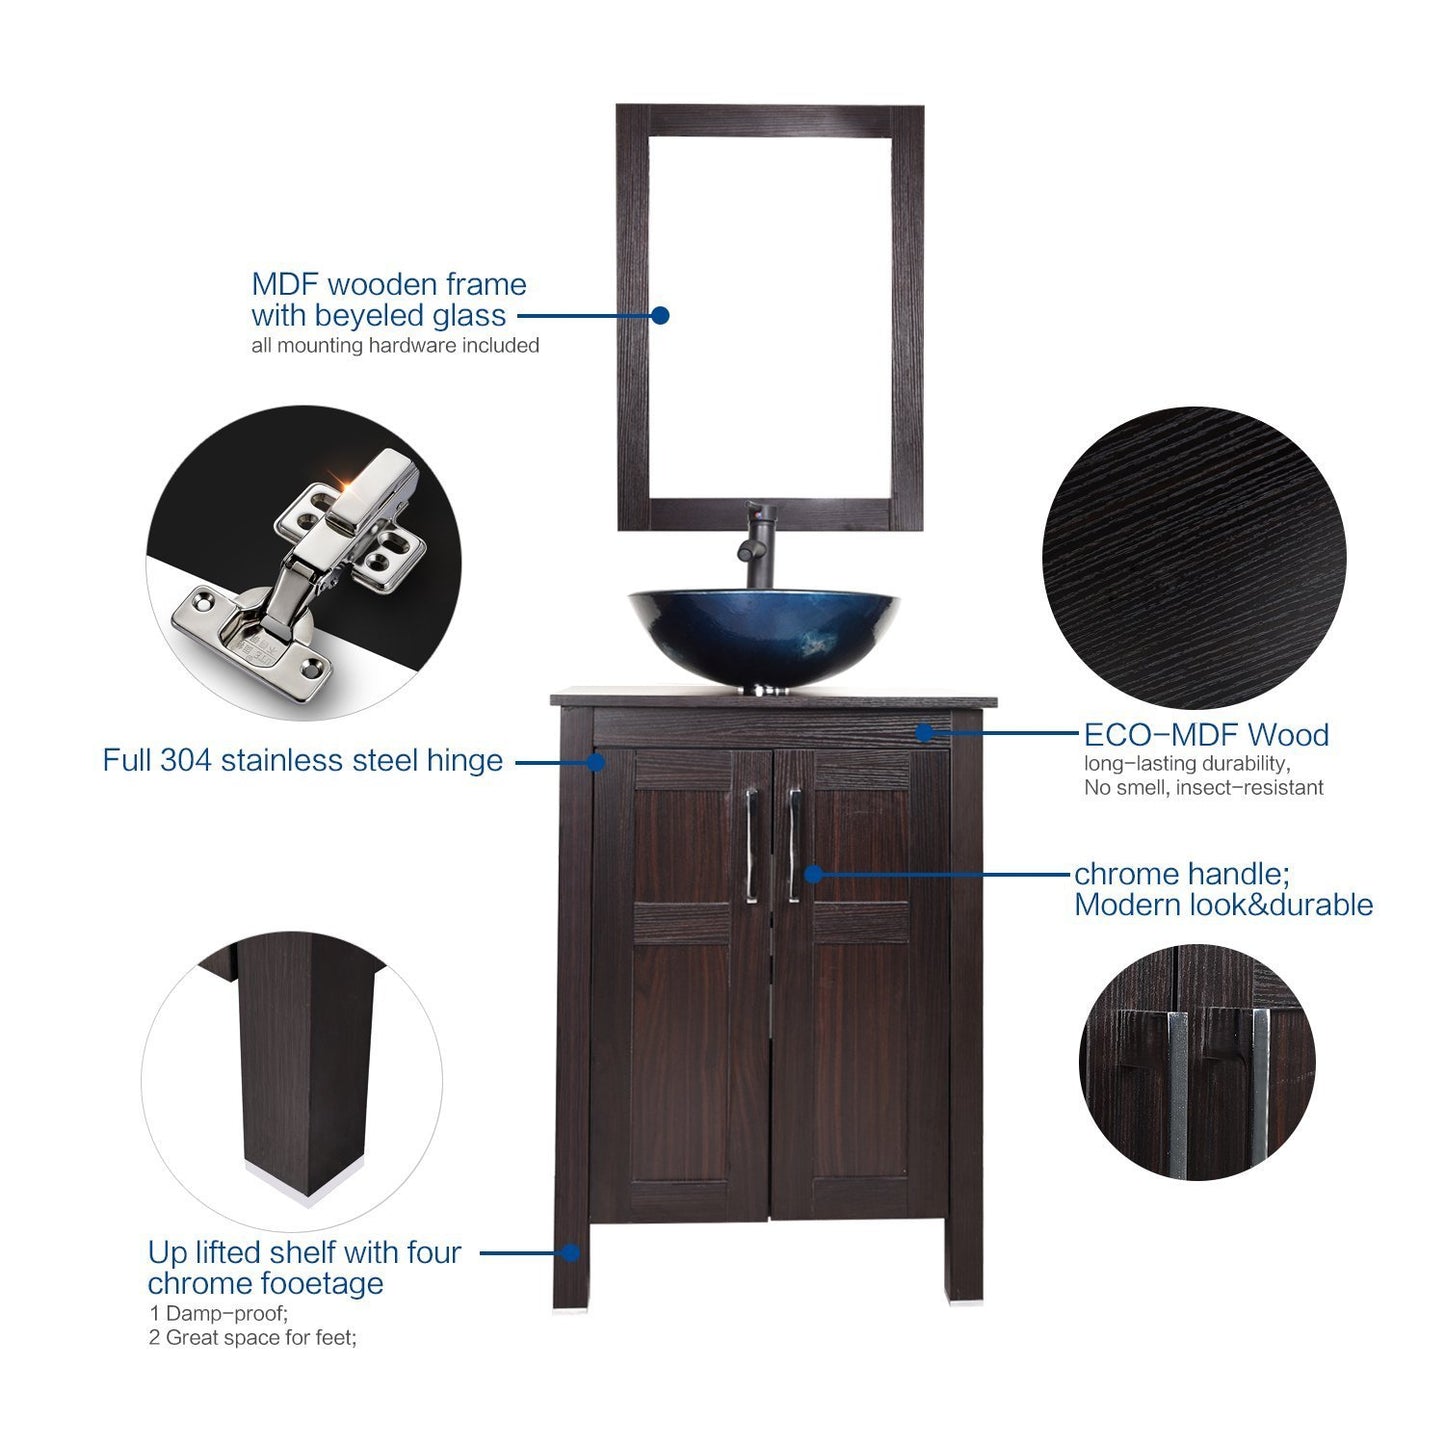 Top elecwish usba20090 usba20077 bathroom vanity and sink combo stand cabinet and tempered blue glass vessel sink orb faucet and pop up drain mirror mounting ring